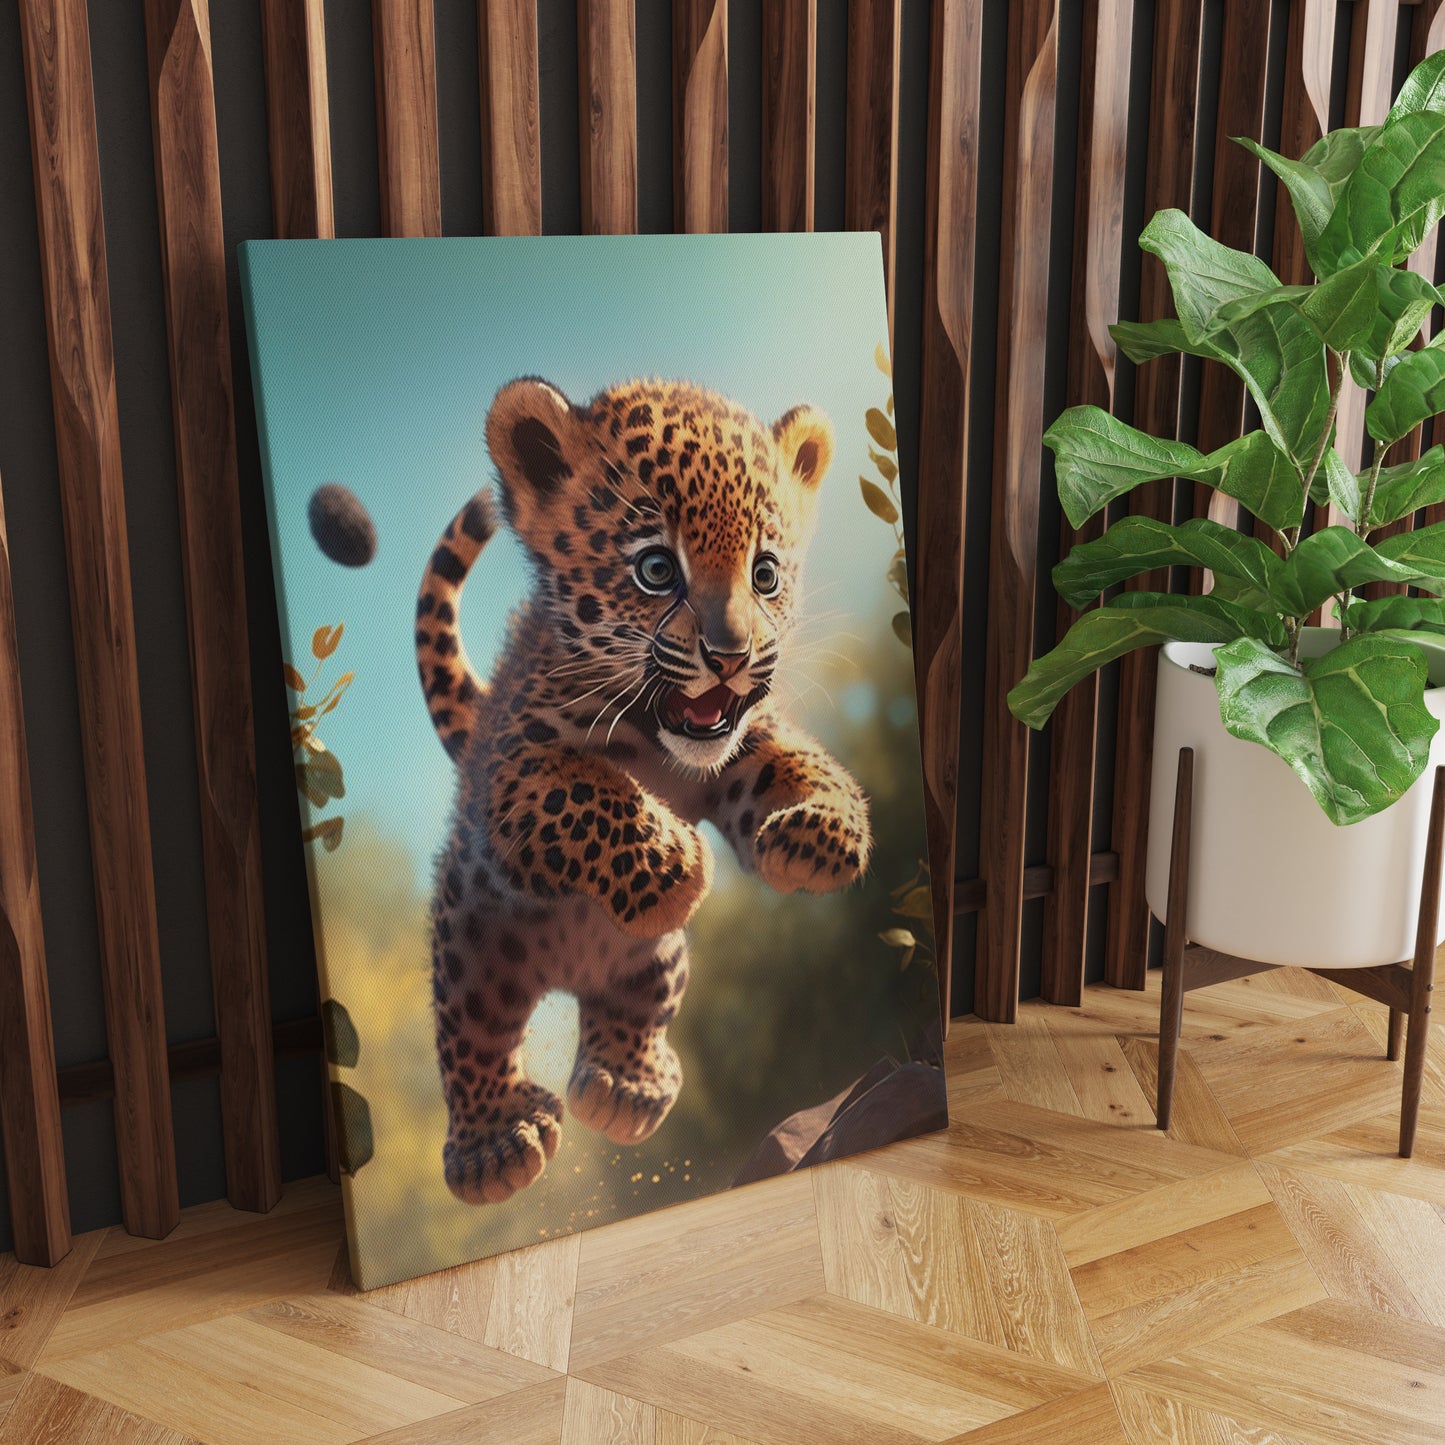 Whimsical Leap: A Wall Art Capturing the Playful Spirit of a Baby Leopard Jumping Over Stones in a Forest - Embrace the Joy of Nature's Marvels - S05E68